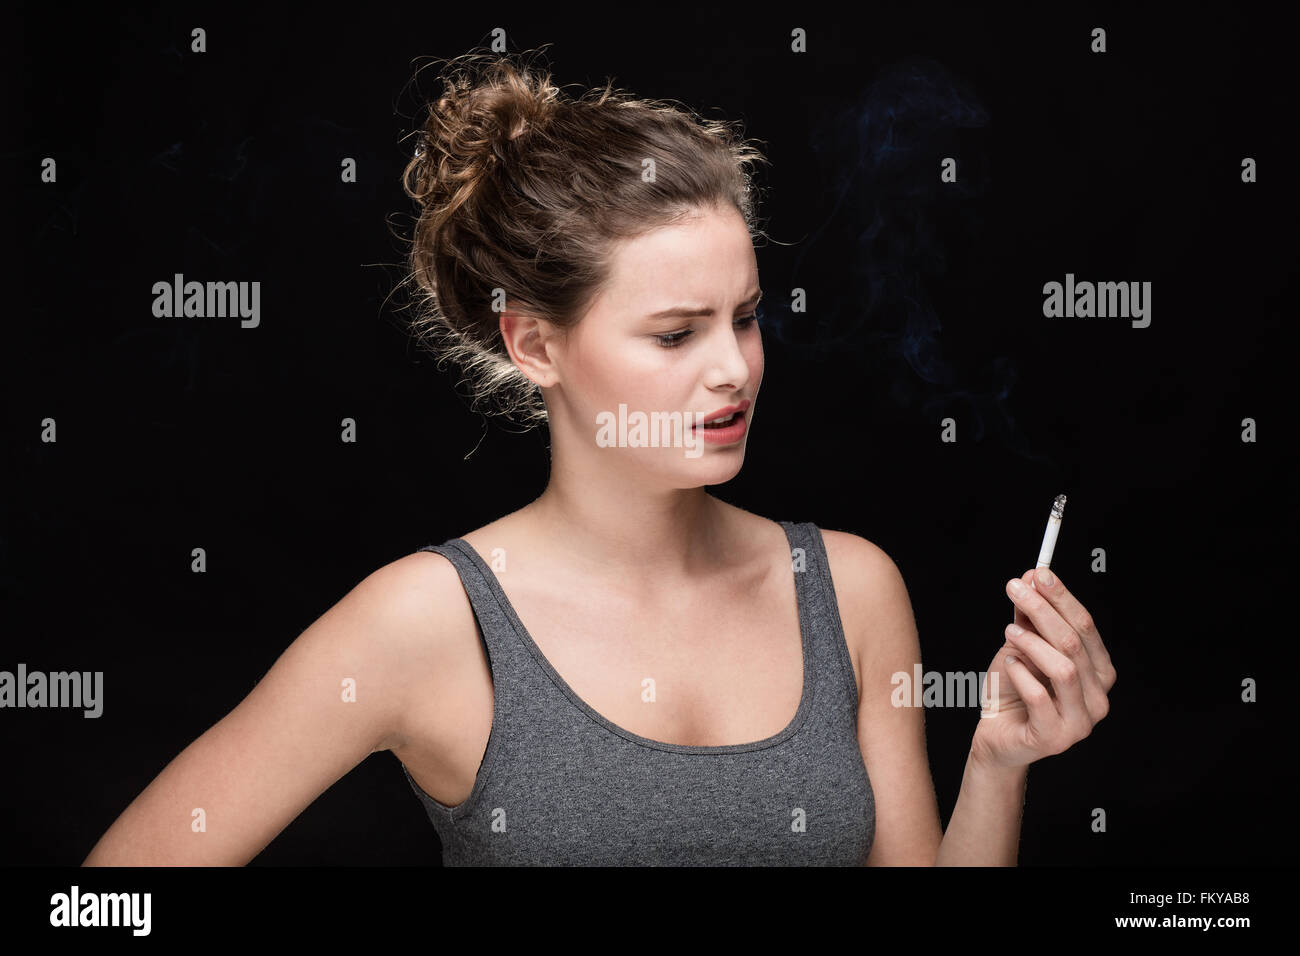 young woman with cigarette, smoking concept on black background Stock Photo